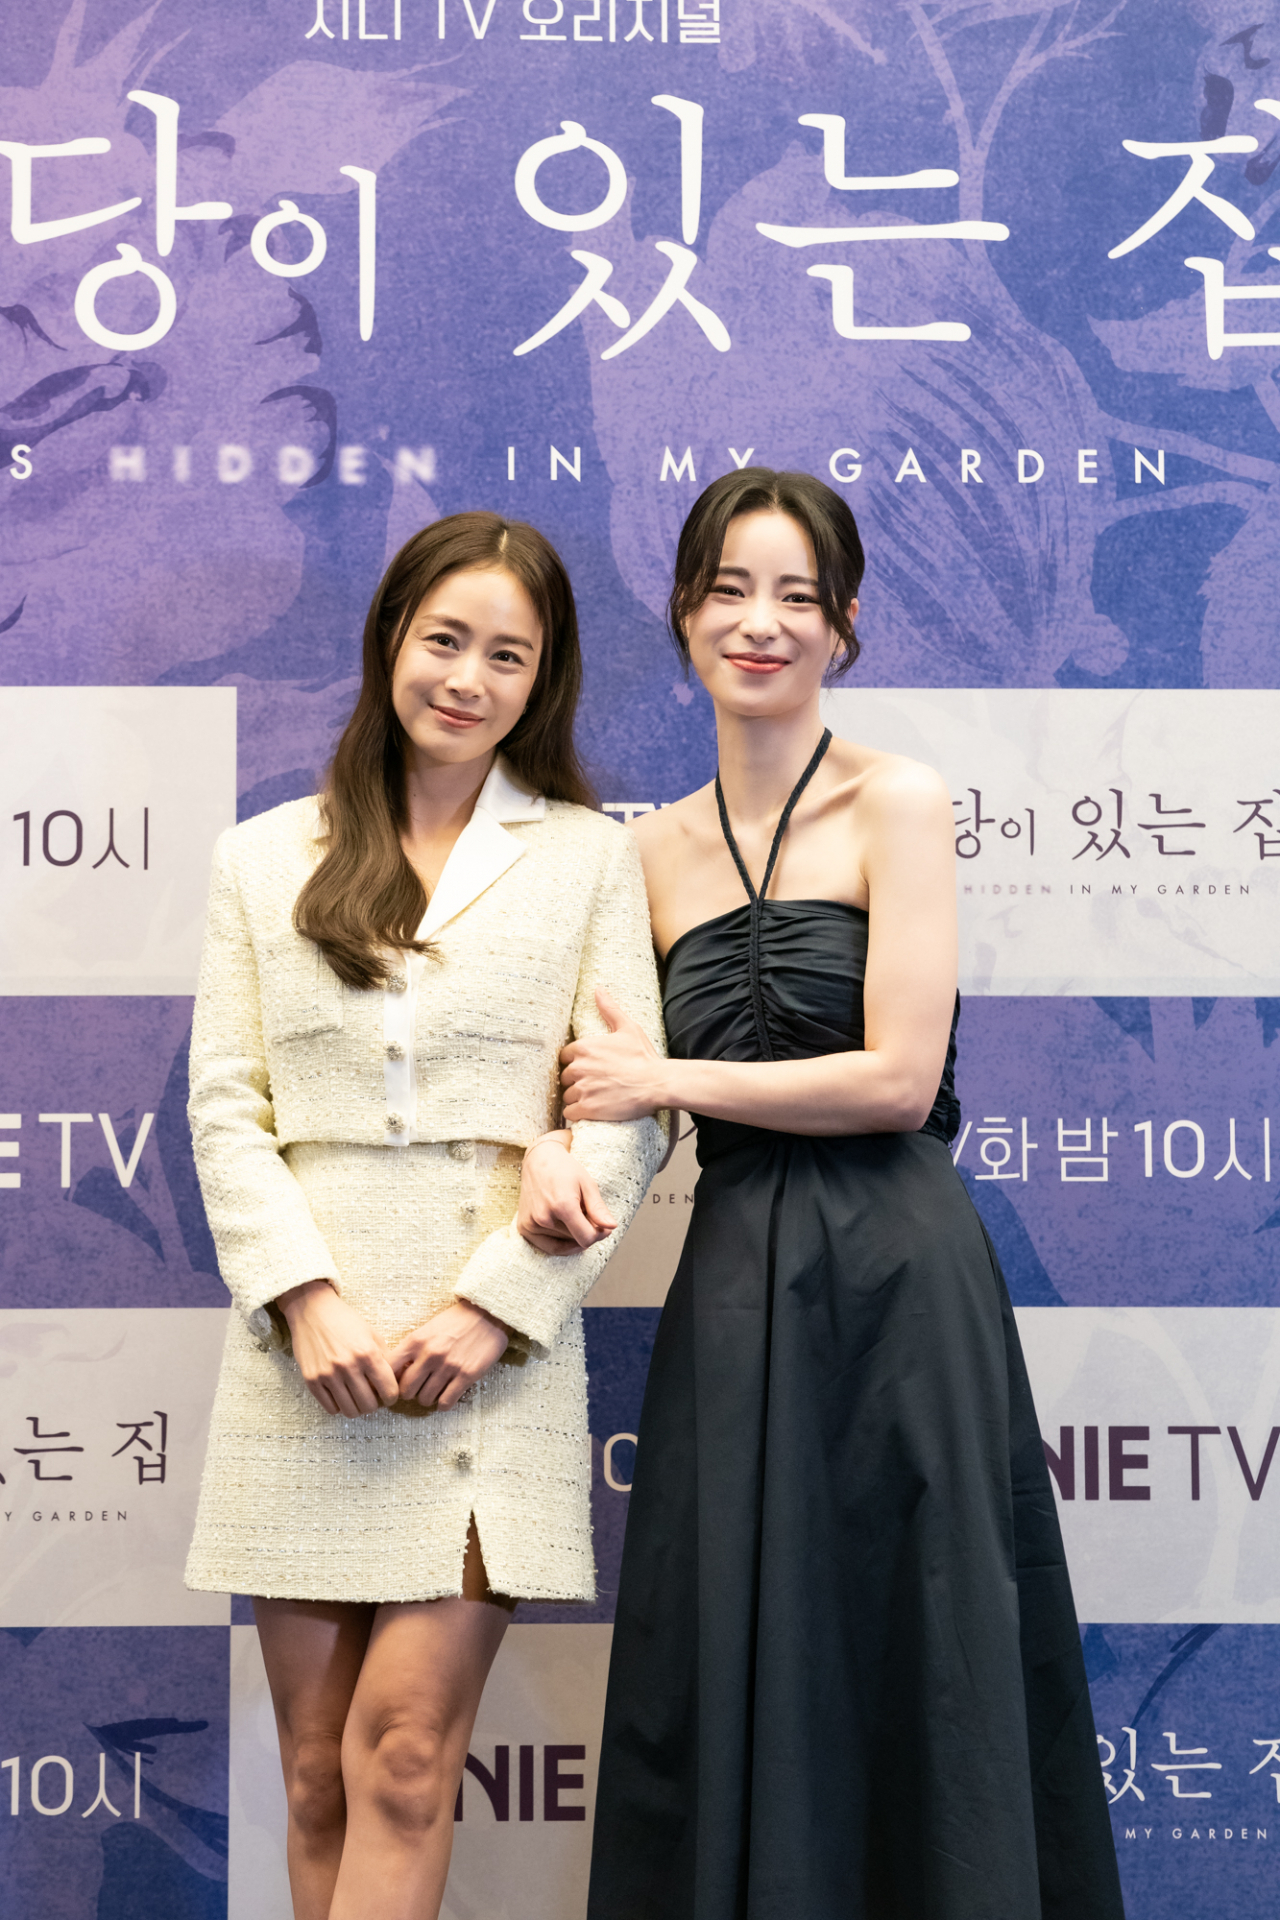 Kim Tae-hee and Lim Ji-yeon pose for photos before a press conference at Stanford Hotel Seoul in Mapo-gu, Seoul on Monday. (KT Studio Genie)